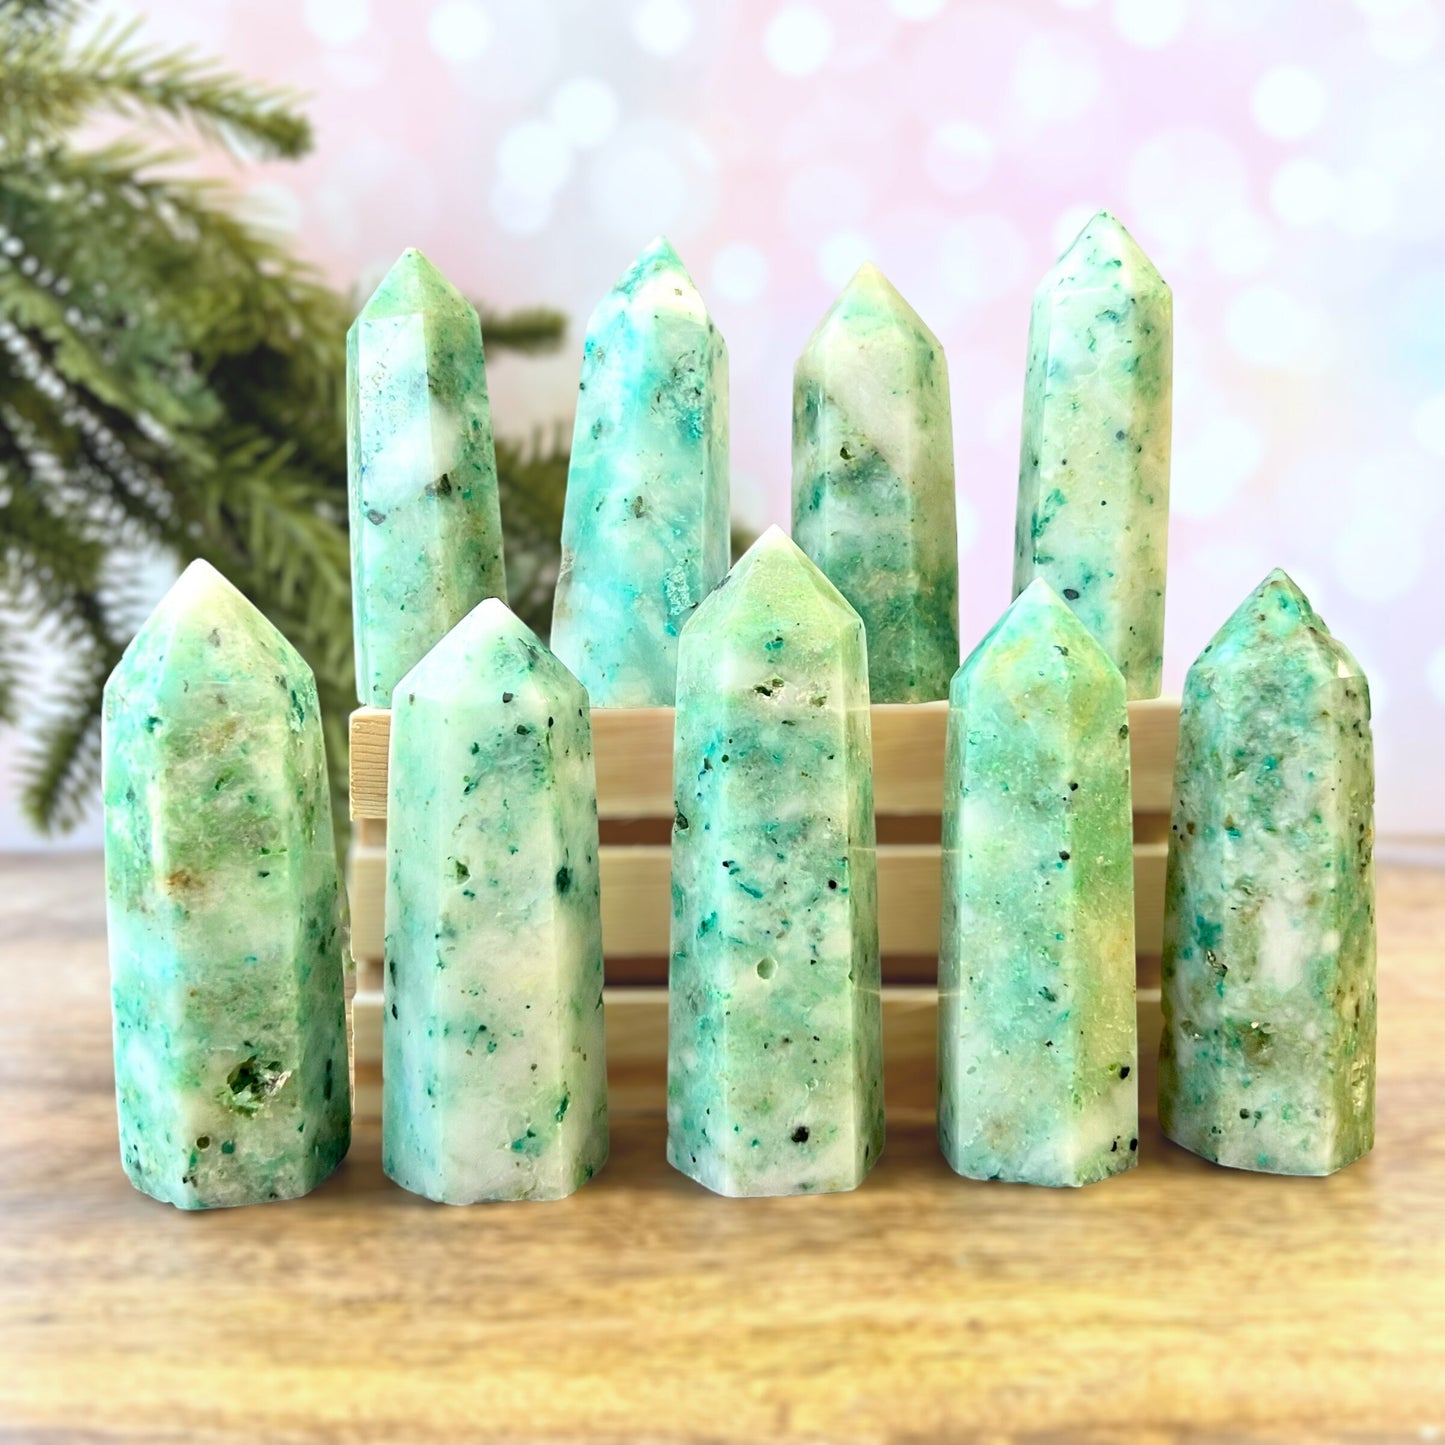 Phoenix Stone Crystal Tower - You get one